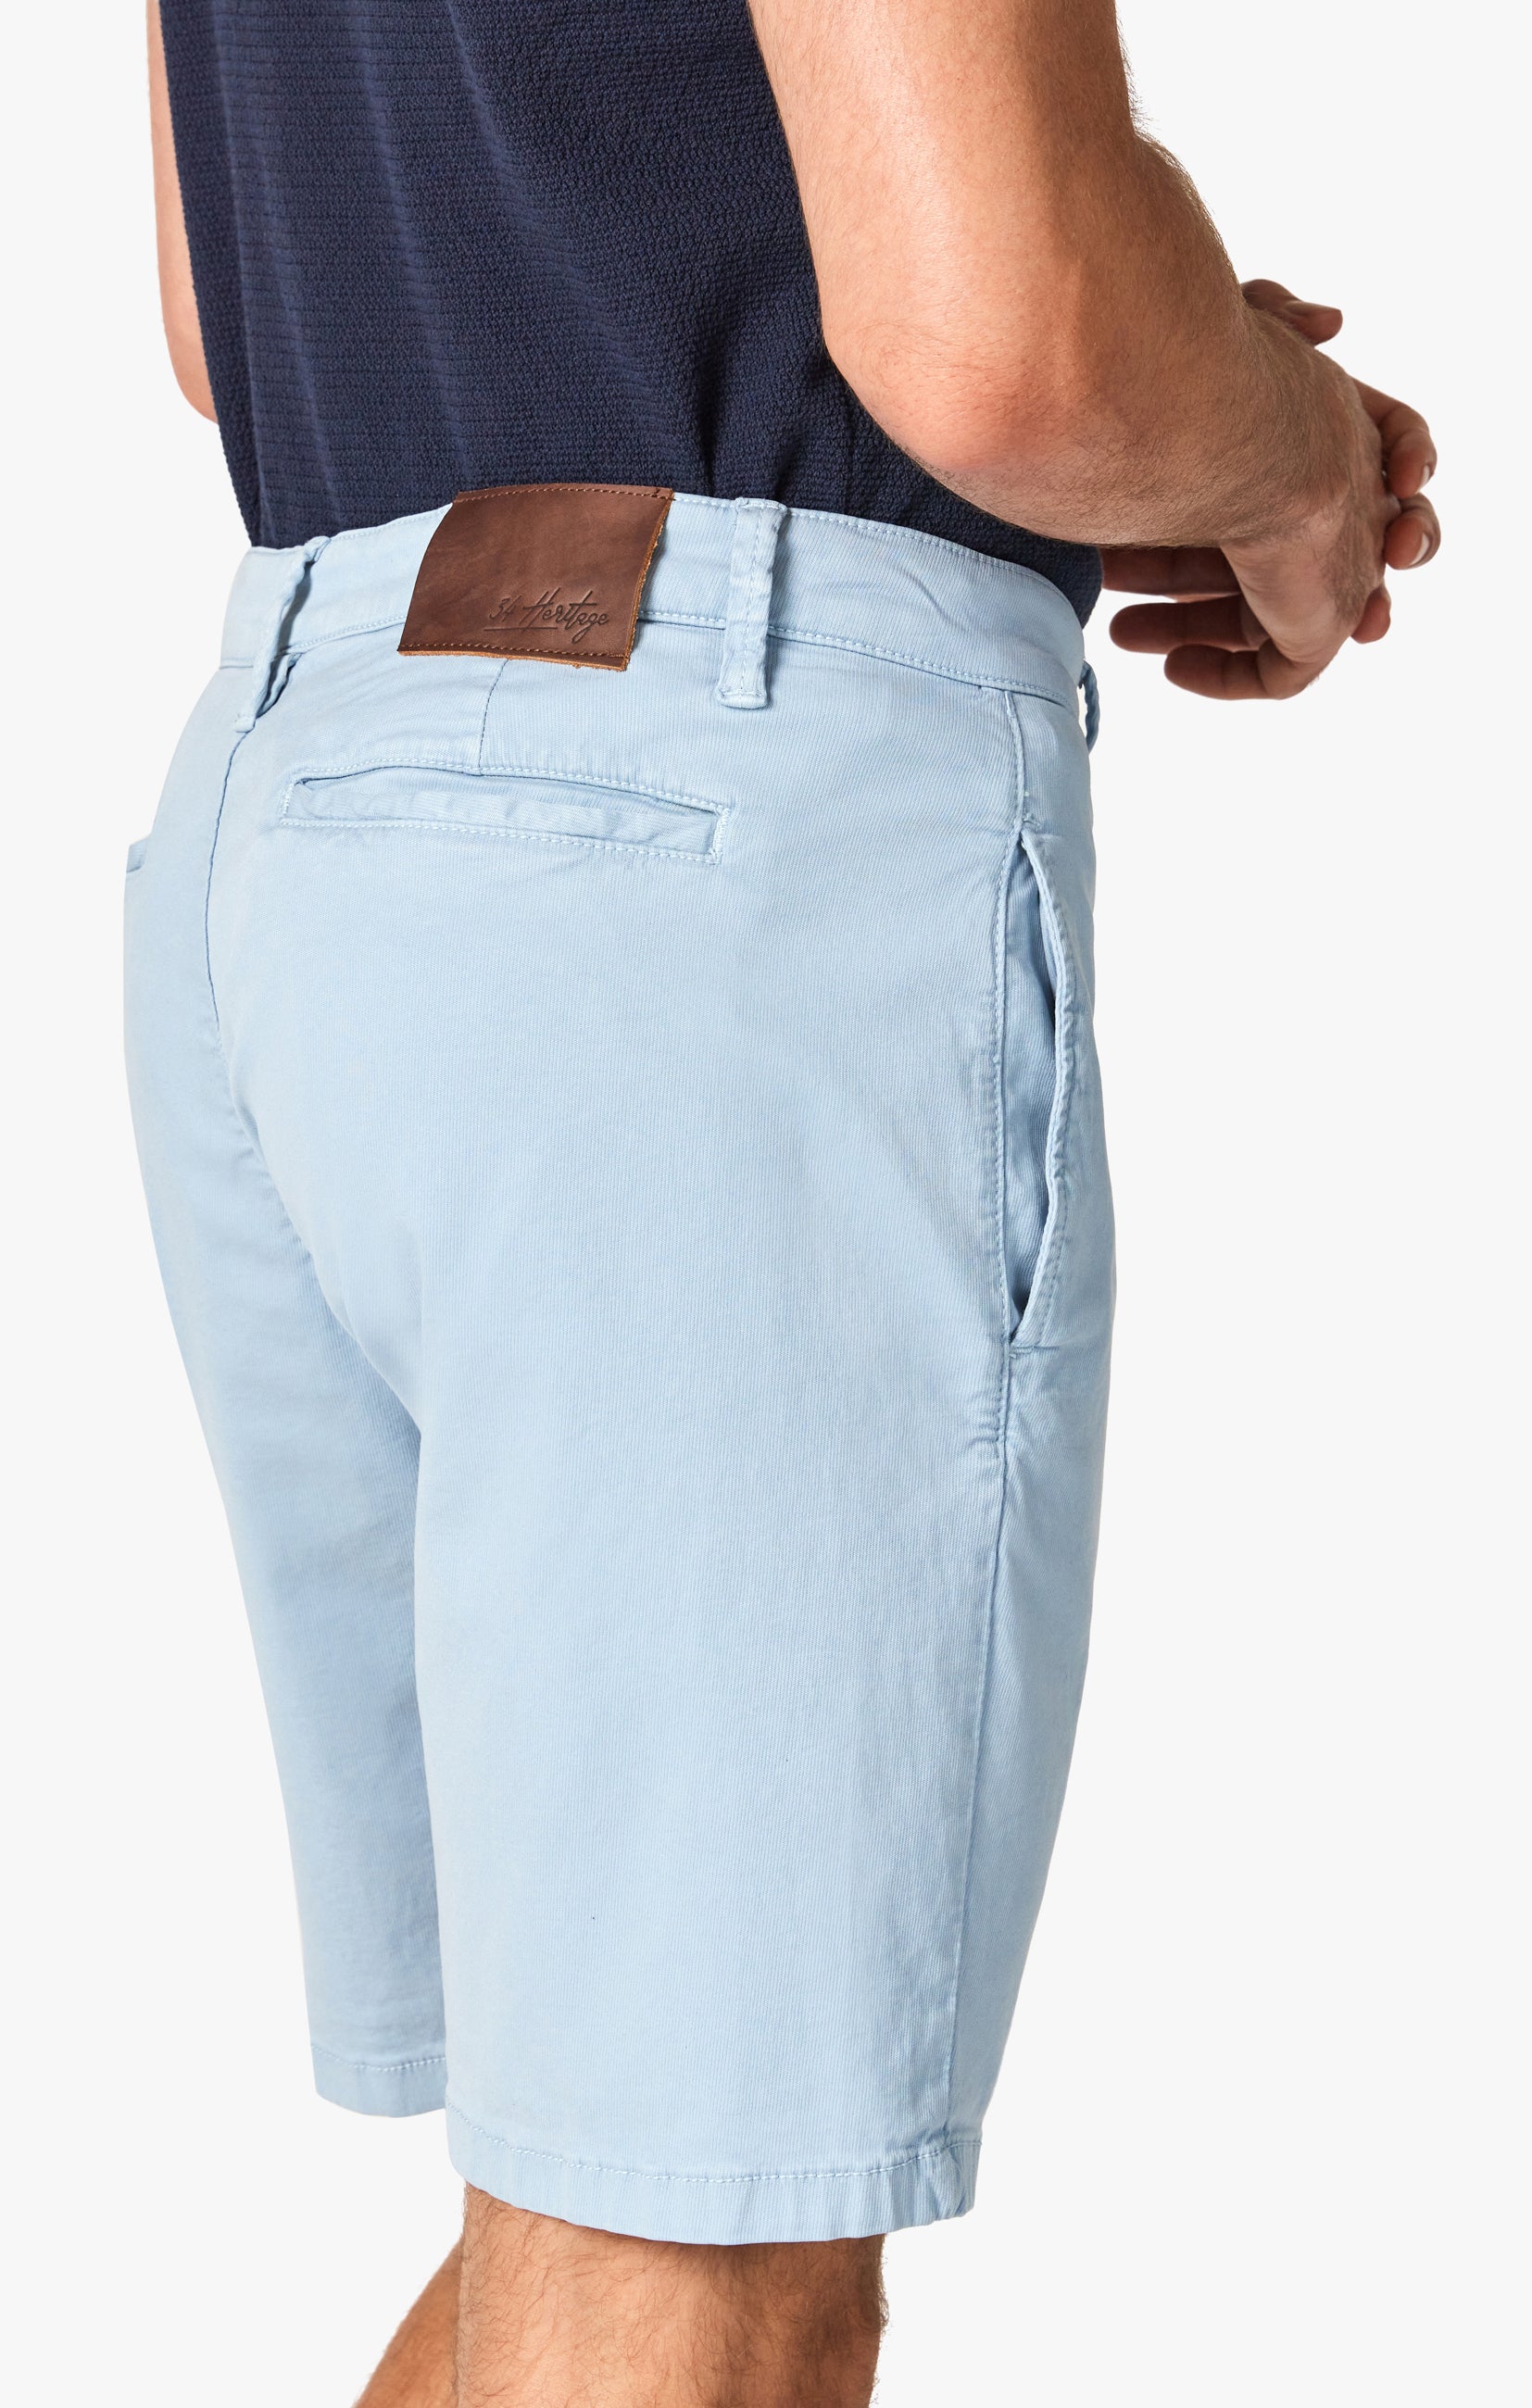 Nevada Shorts In Faded Denim Soft Touch Image 6